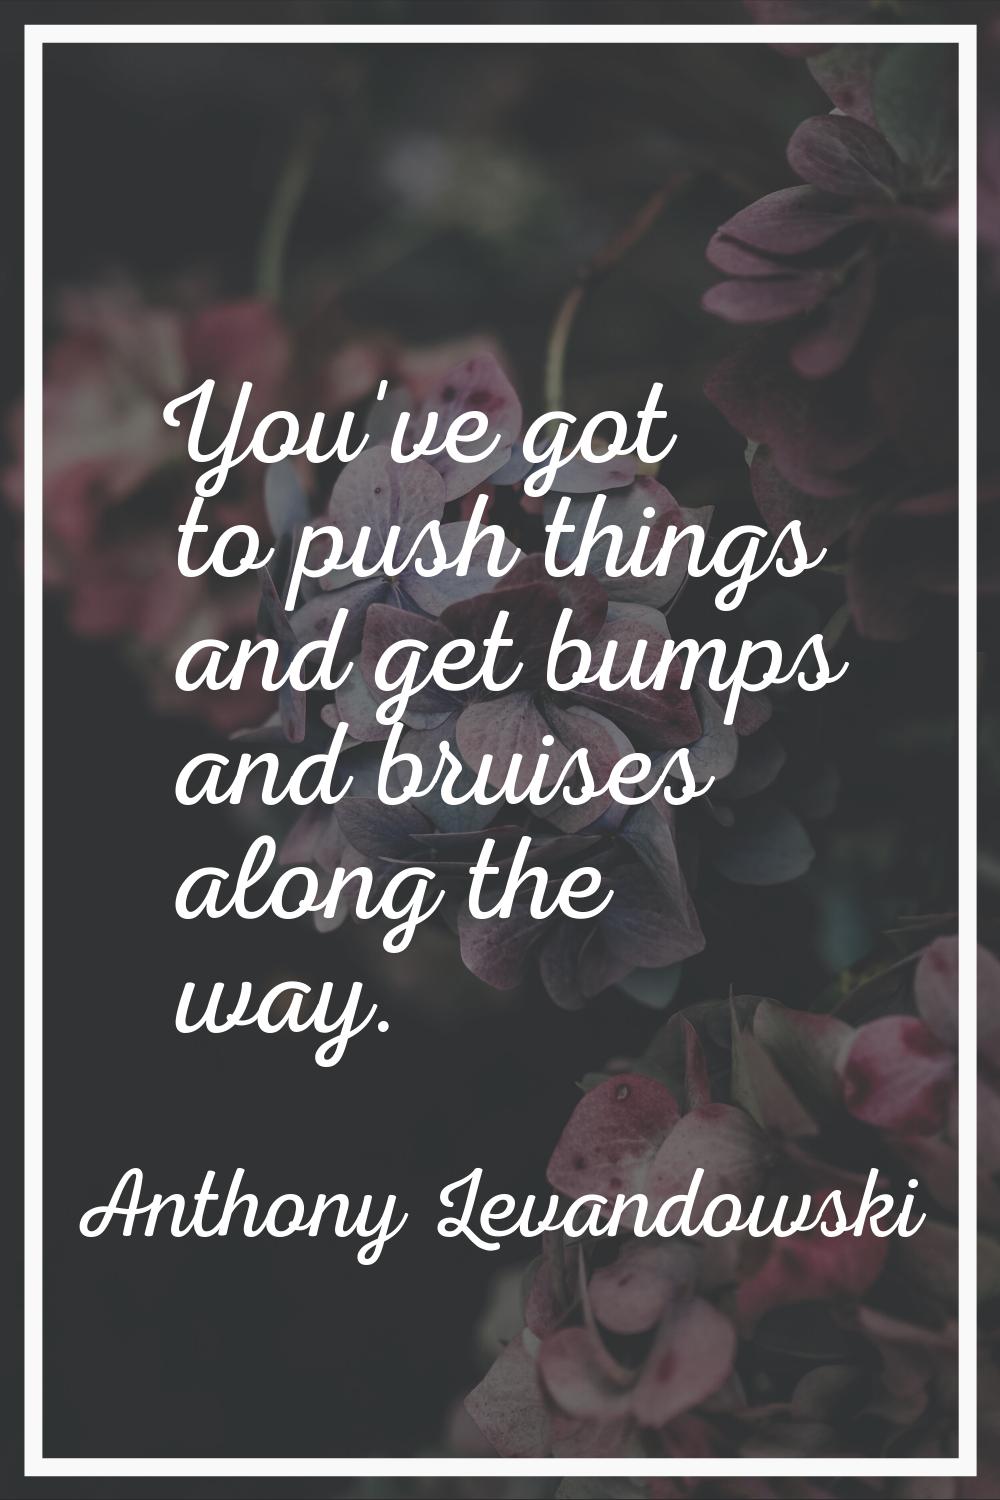 You've got to push things and get bumps and bruises along the way.